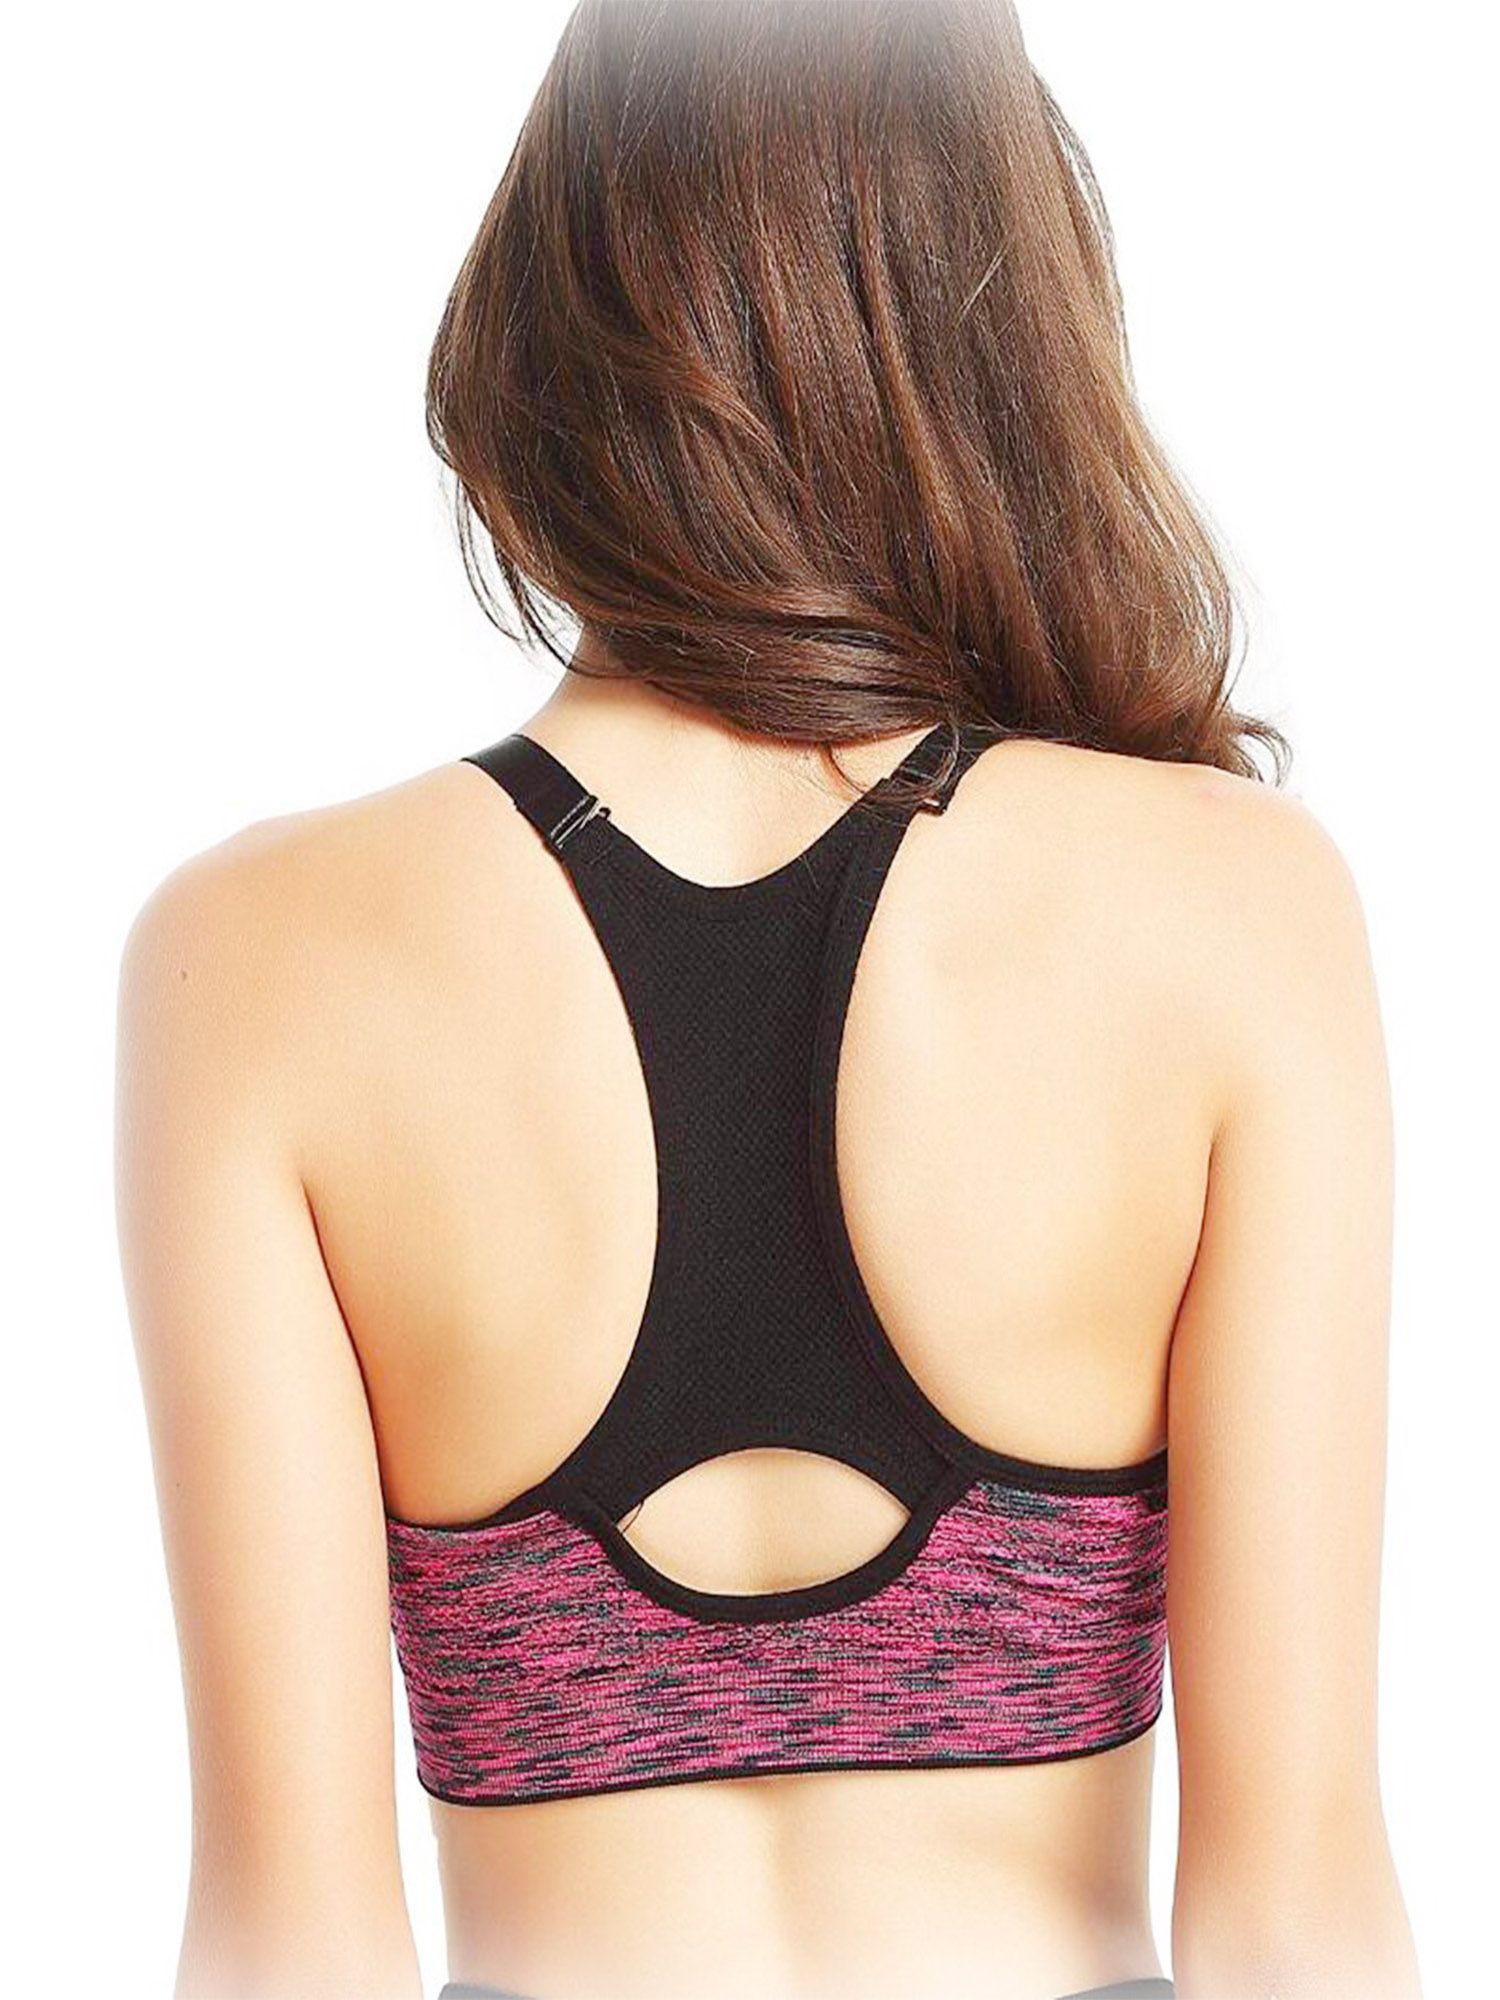 PULLIMORE Women Seamlesss Racerback Sport Bra Removable Pad Yoga Lingerie Bras for Yoga Gym Workout Fitness (XL, Rose Red) - image 3 of 9